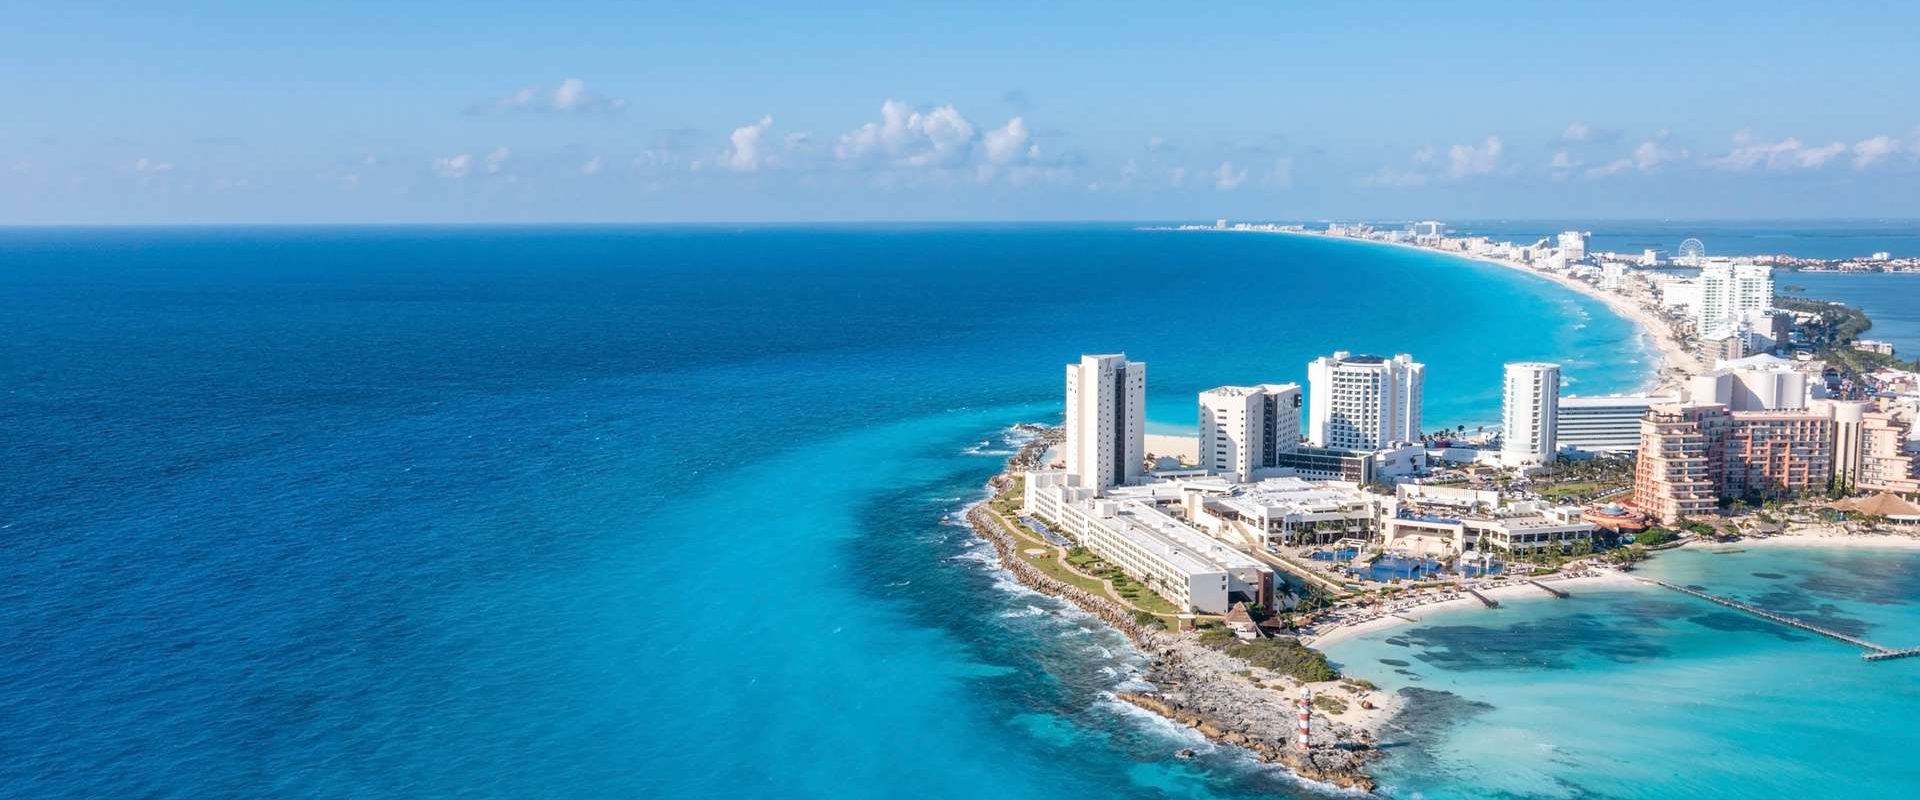 Aerial view of the luxury hotels in Cancun by the Punta Norte beach in Mexico. Luxury resorts located at the very shore of the Caribbean sea.